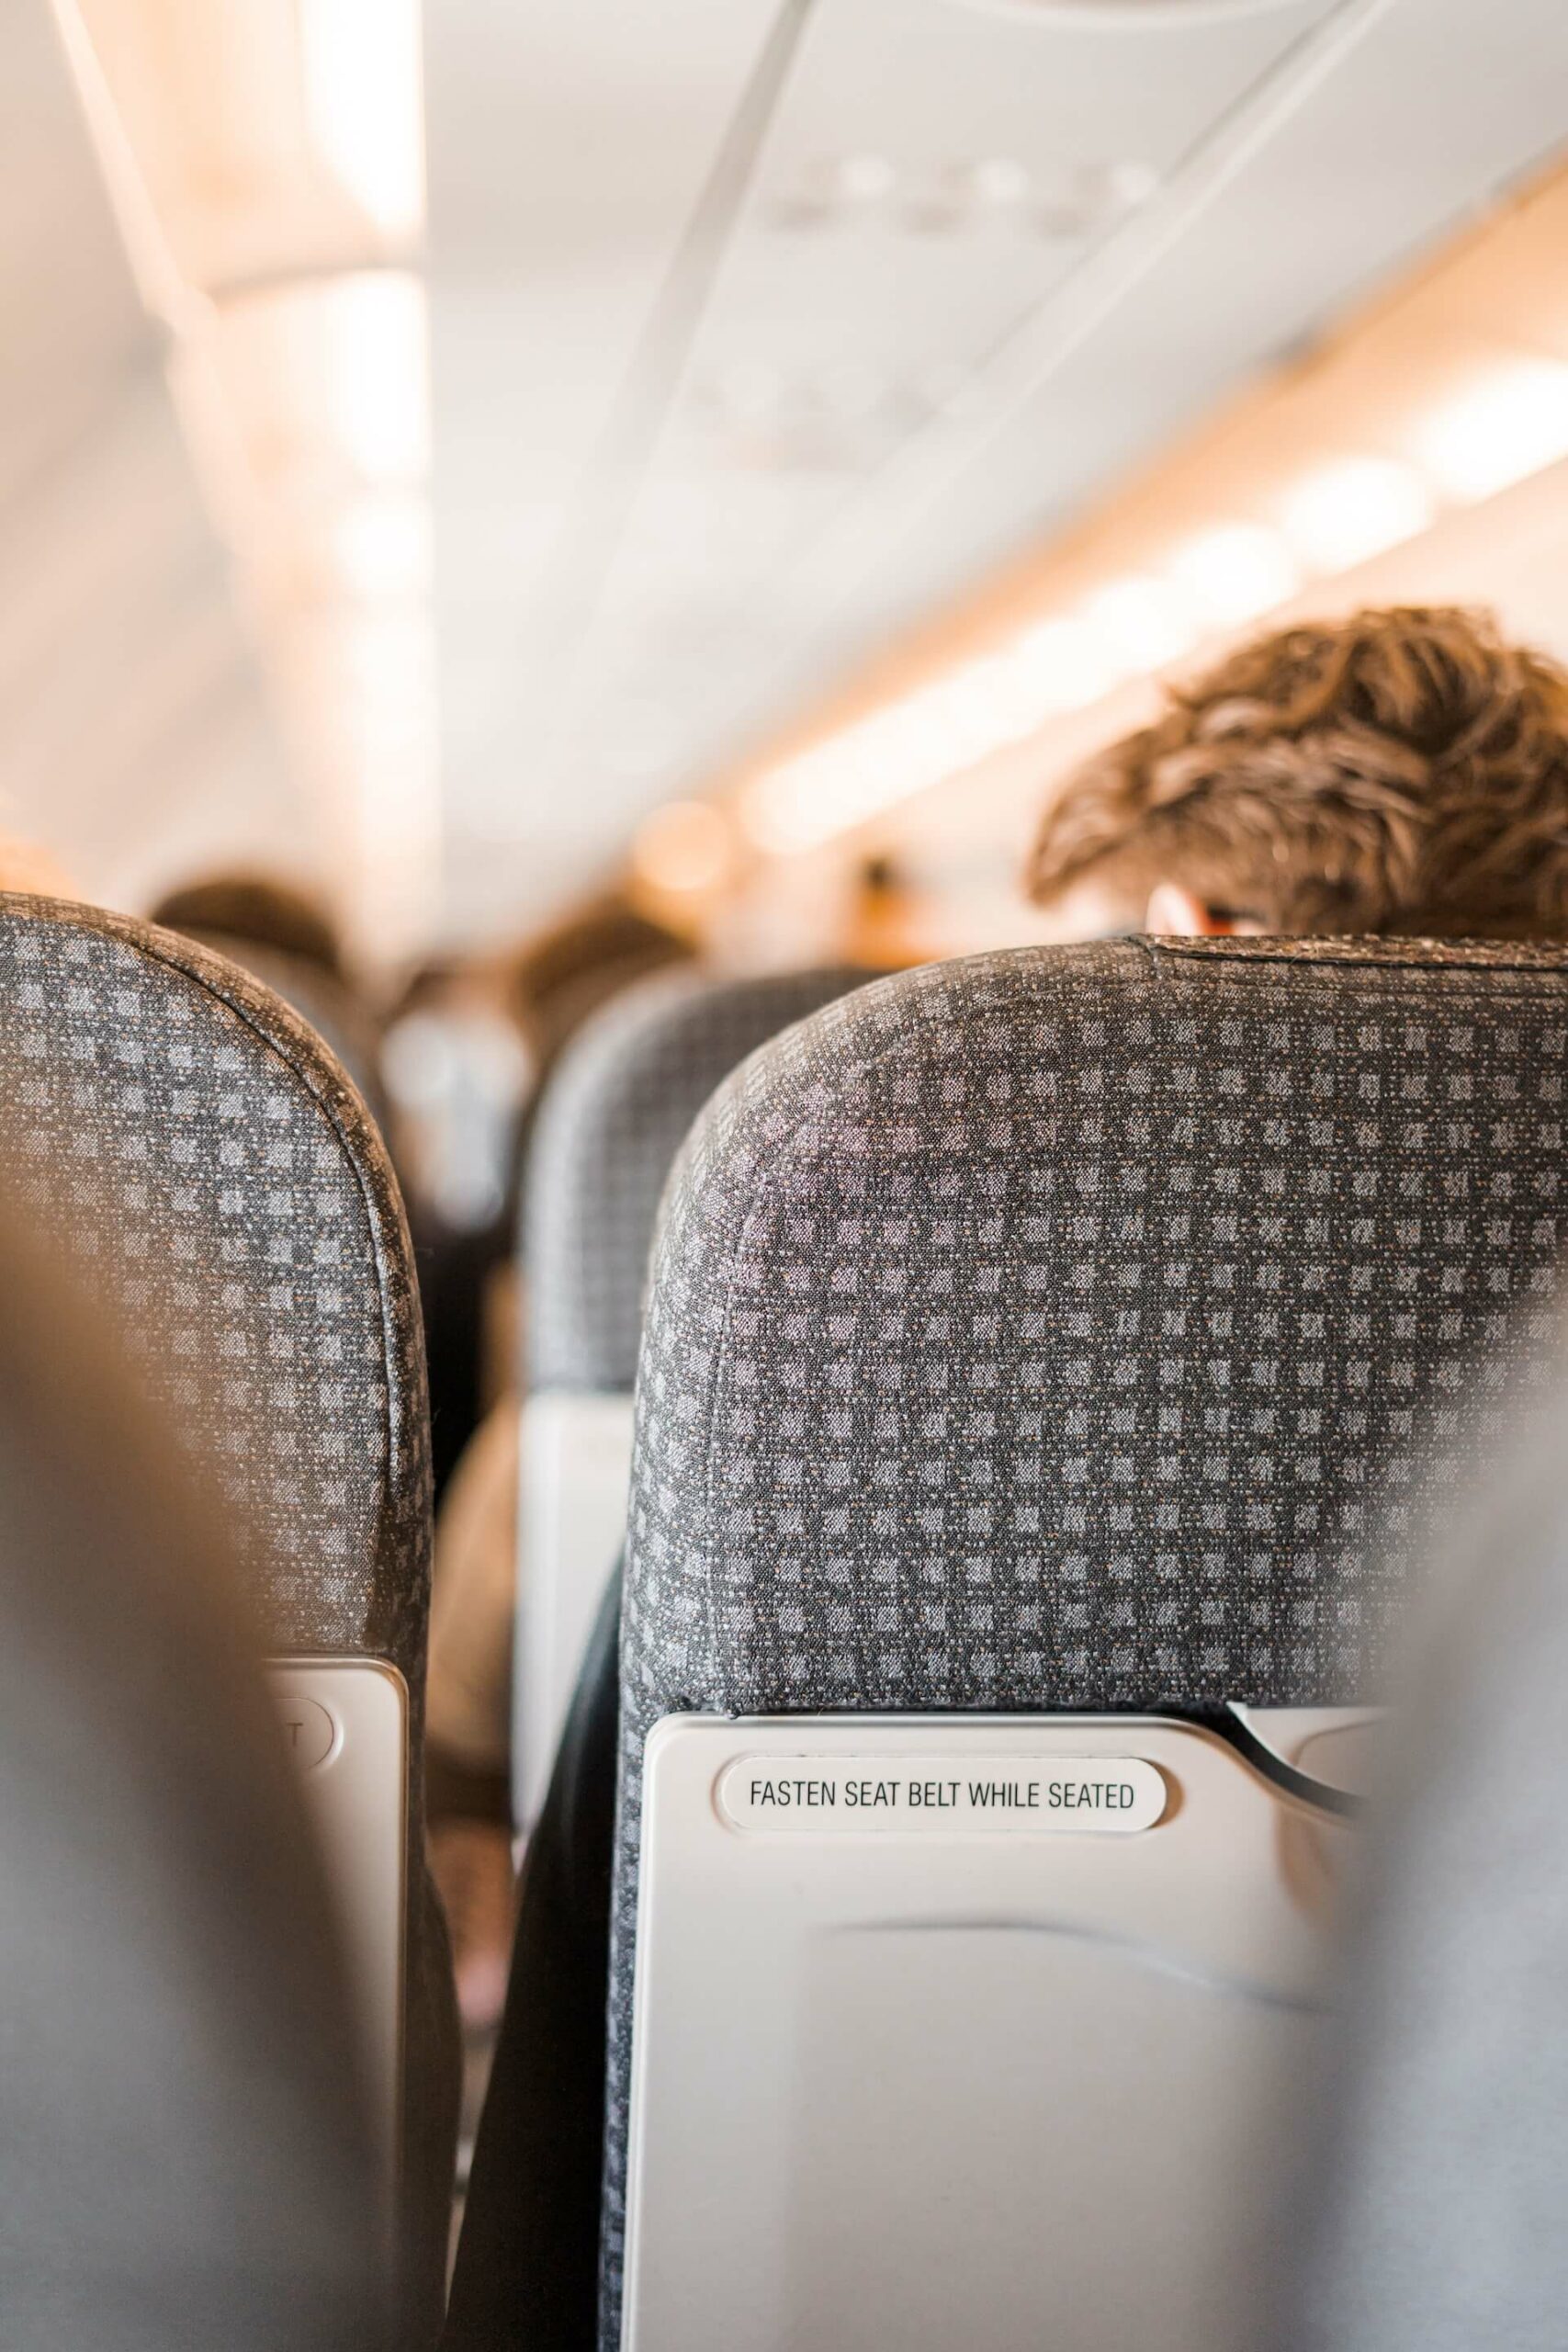 Sky-high Manners: Nailing Flying Etiquette 101